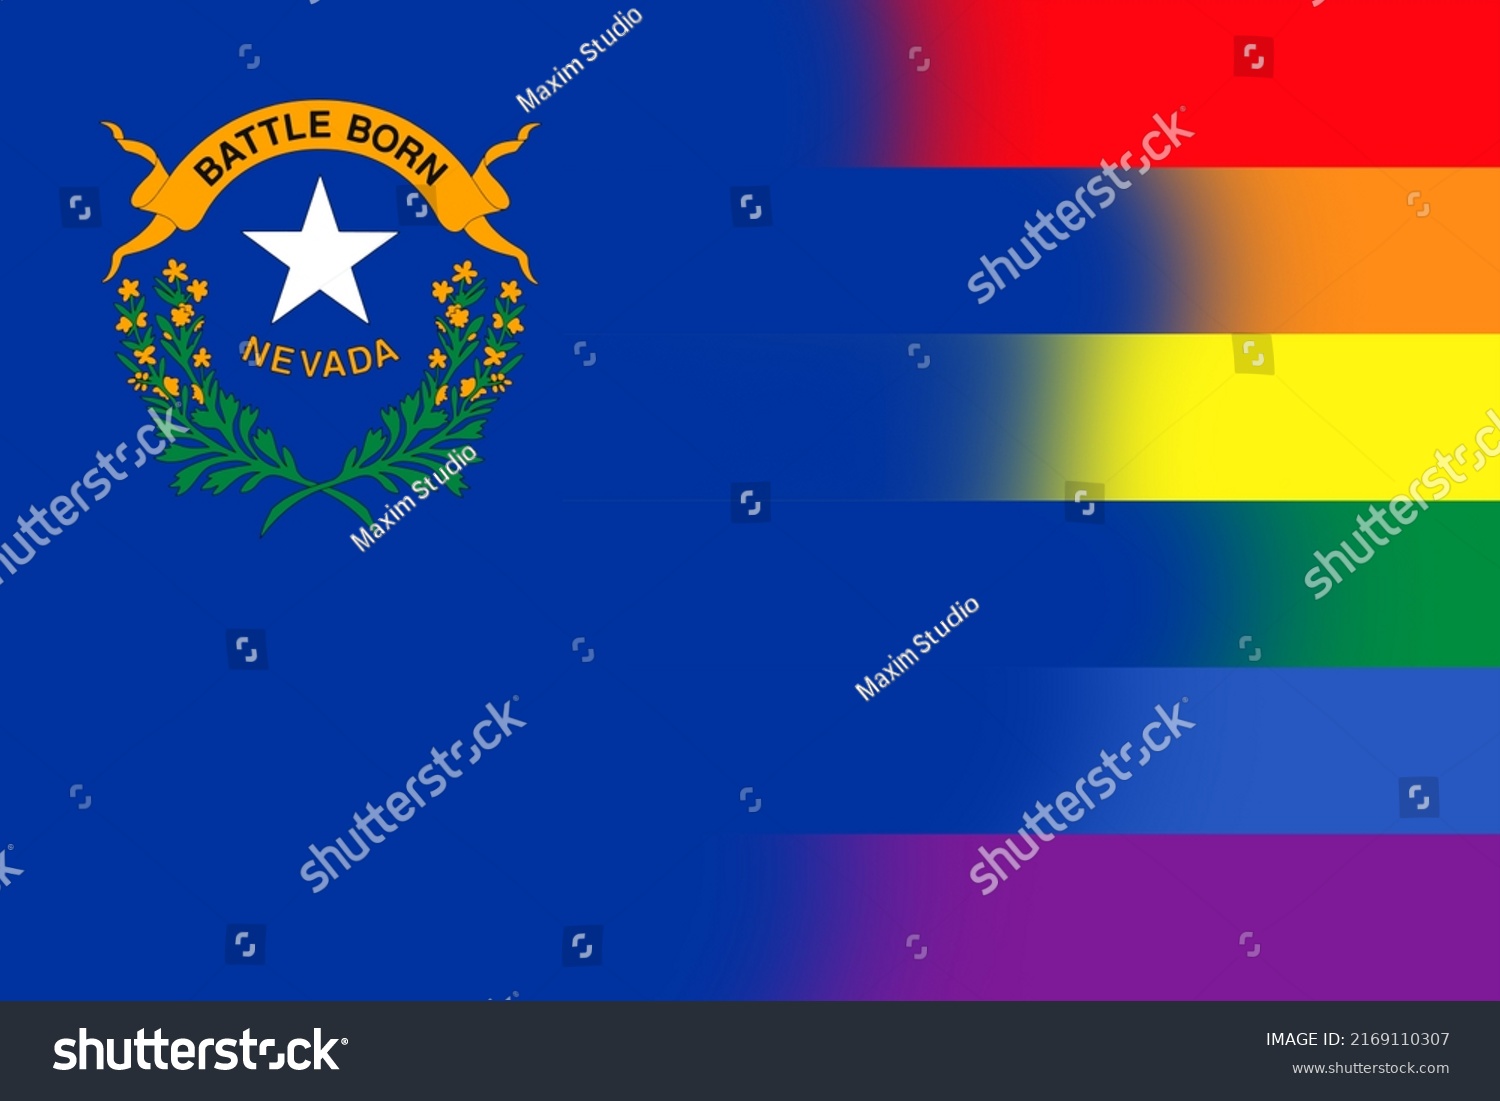 Top View State Lgbt Flag Nevada Stock Illustration 2169110307 Shutterstock 1117